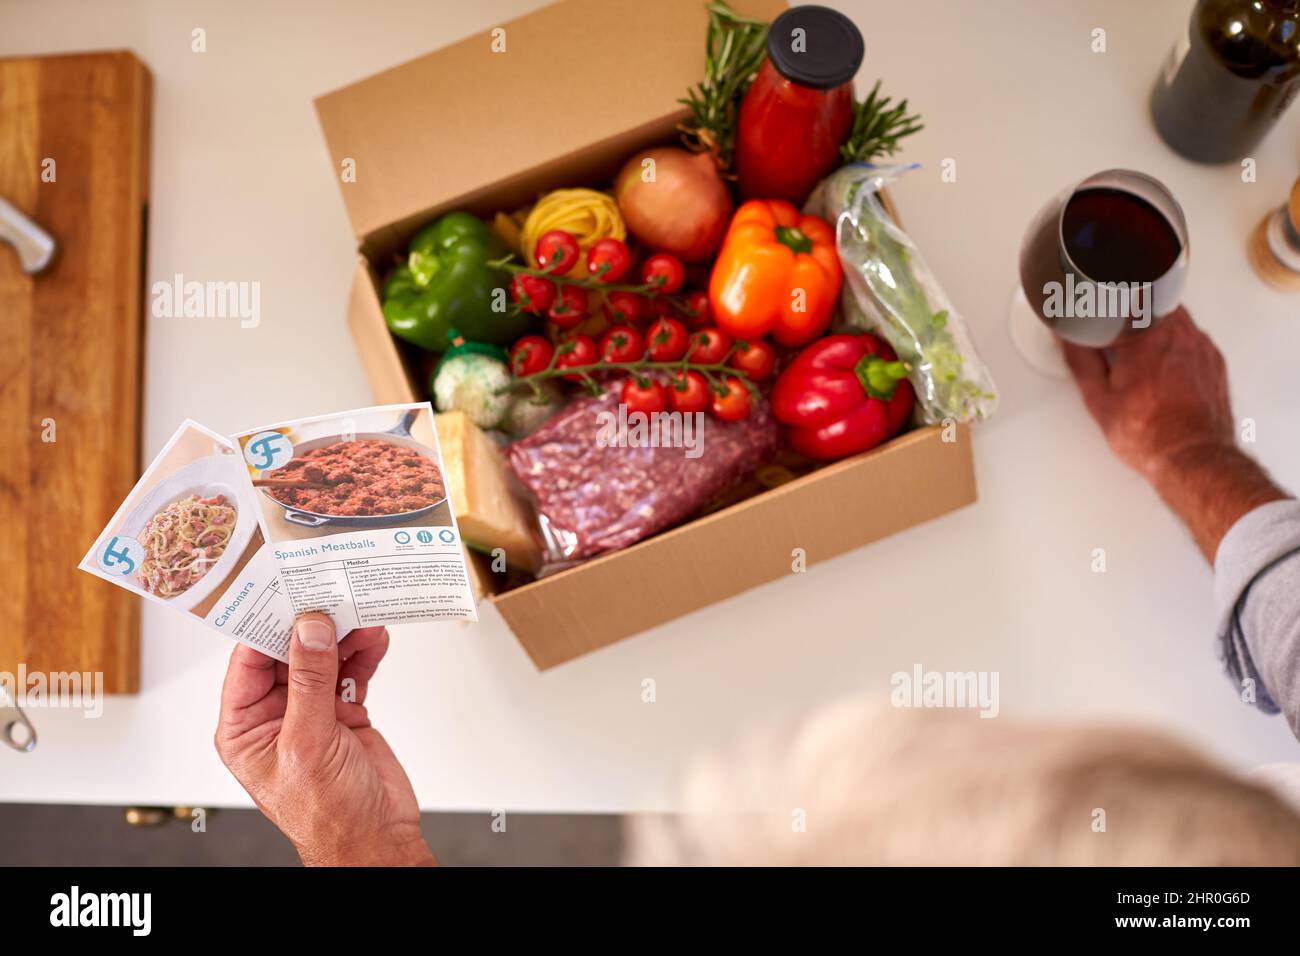 Overhead Of Man In Kitchen Holding Recipe Cards For Online Meal Food Recipe Kit Delivered To Home Stock Photo